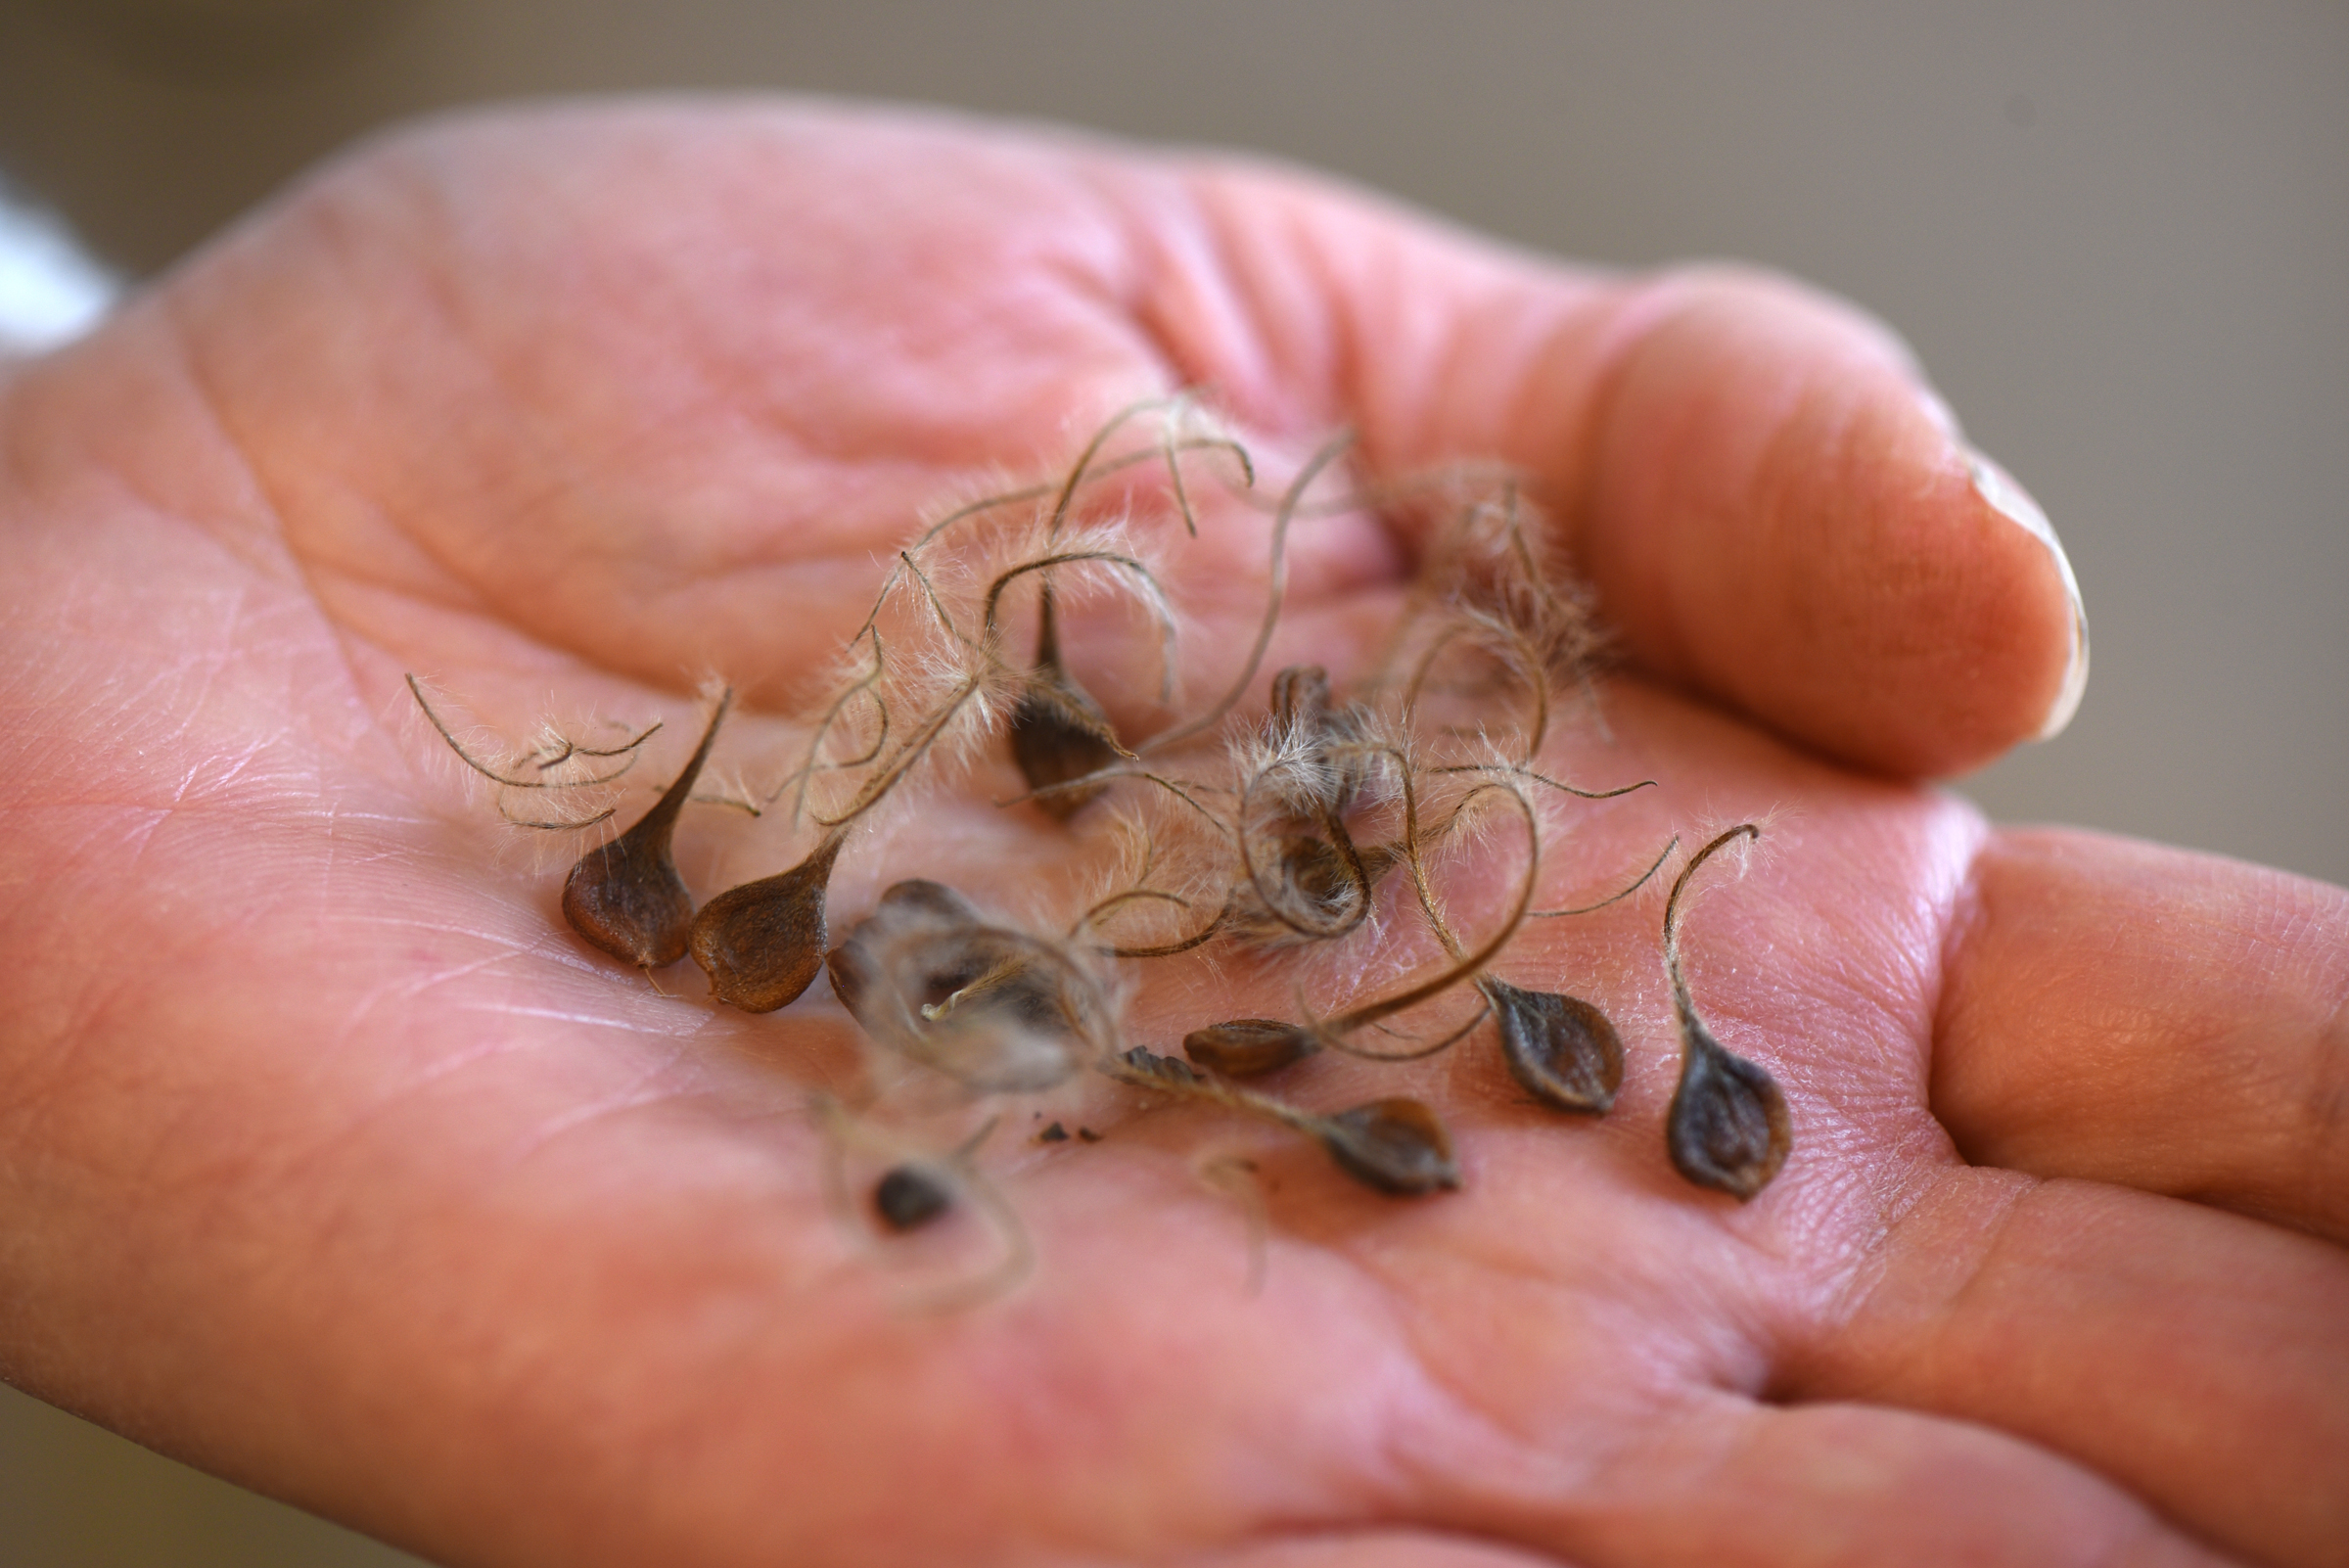 Roxanne Swan hold seeds of Clematis viorna, a vining native plant with purple, bell shaped flowers. Swan is coordinator of the Audubon Center for Native Plants at Beechwood Farms along with being an environmental botanist and horticulturist.